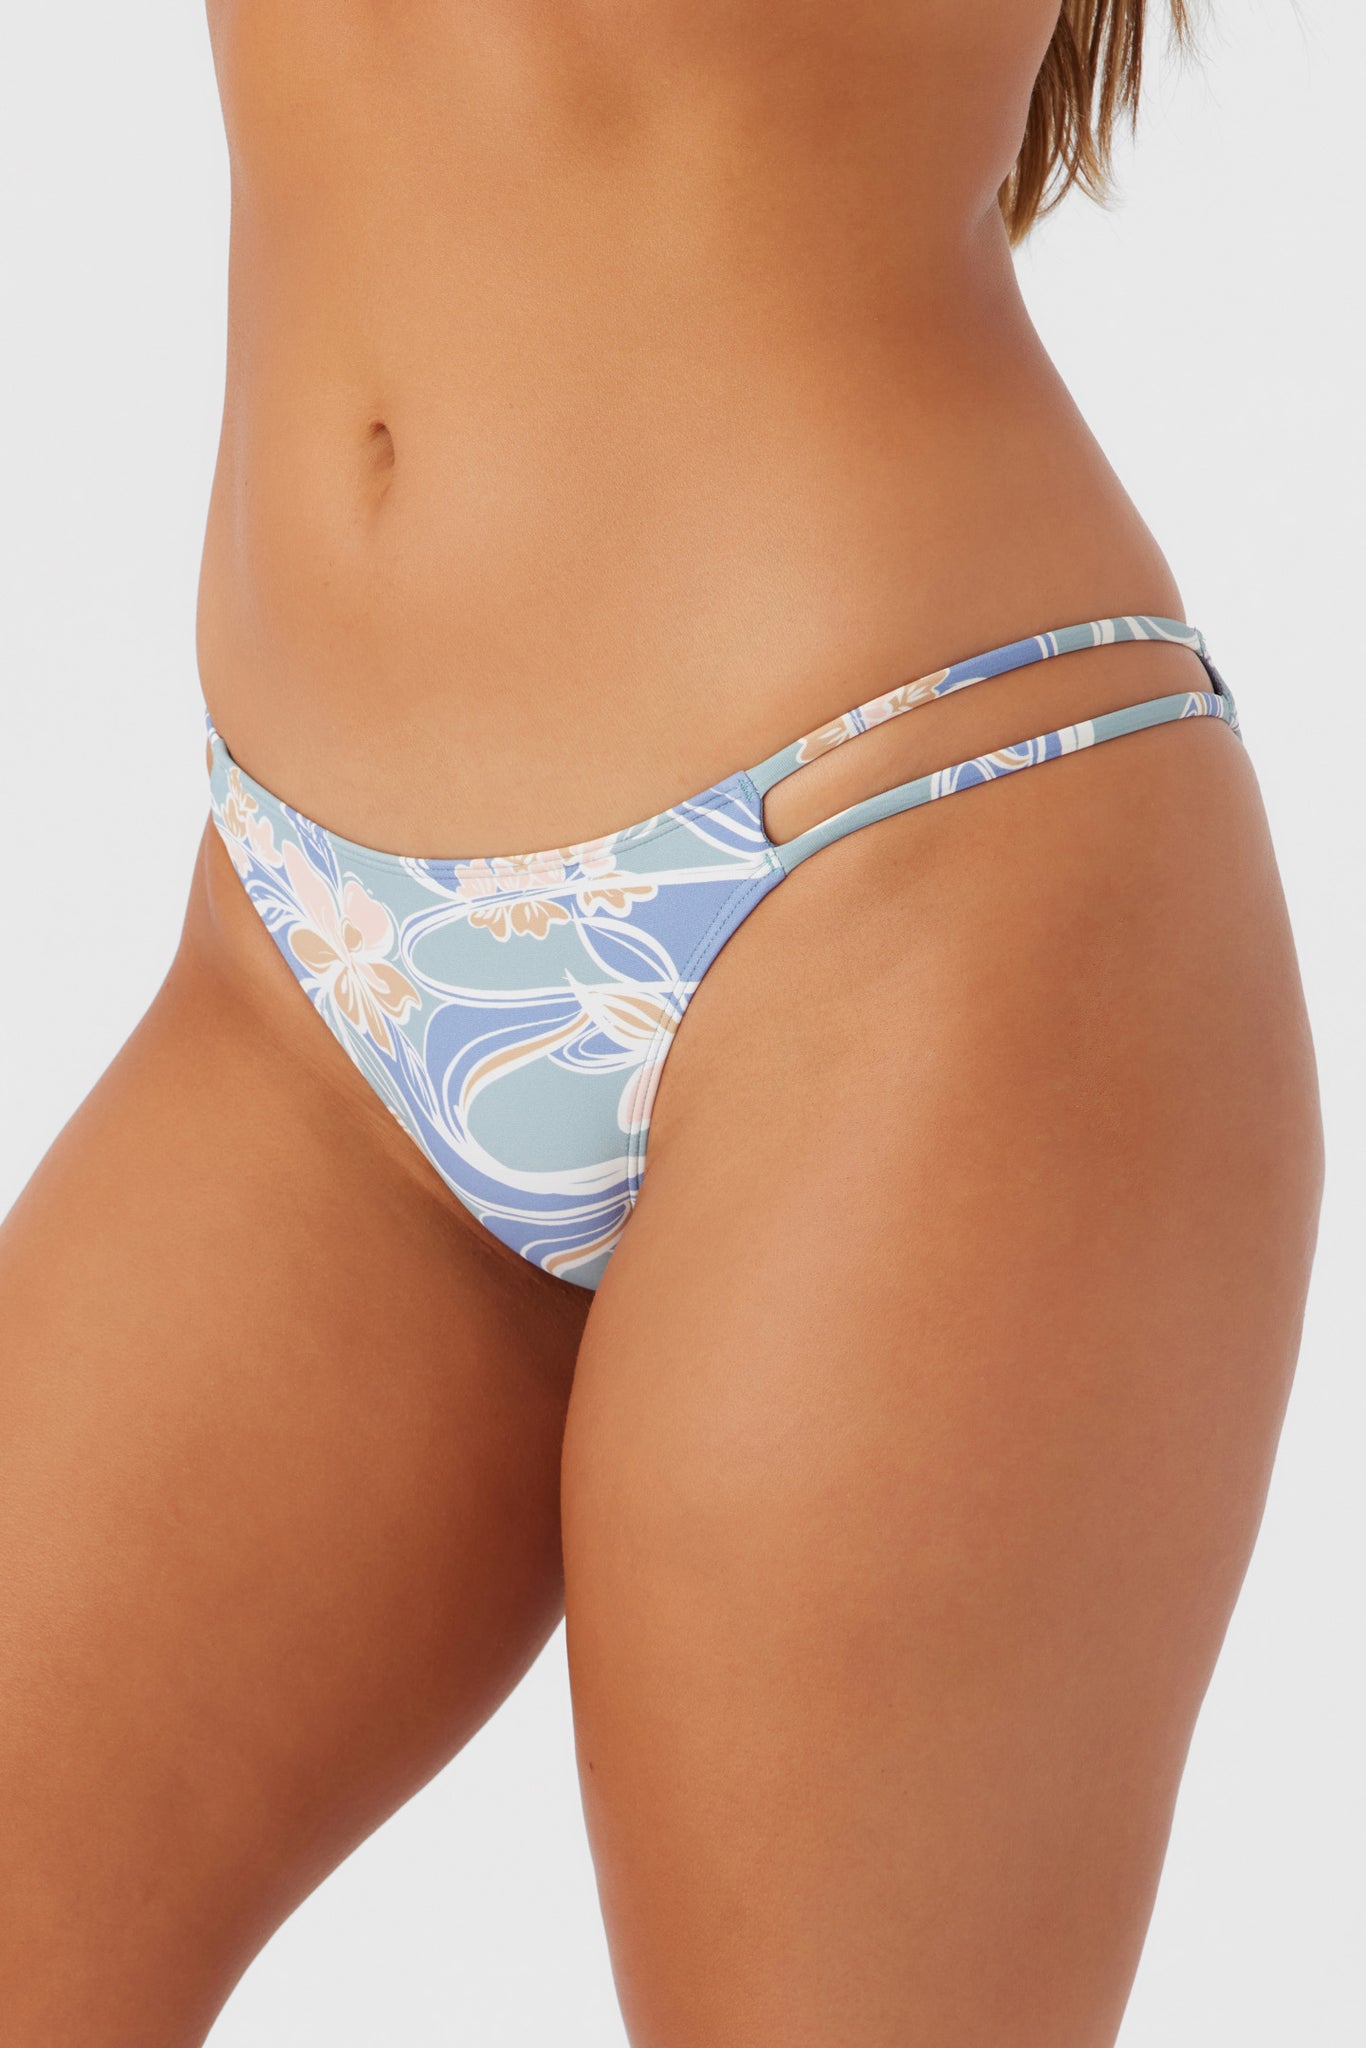 EMMY FLORAL CARDIFF CHEEKY BOTTOMS